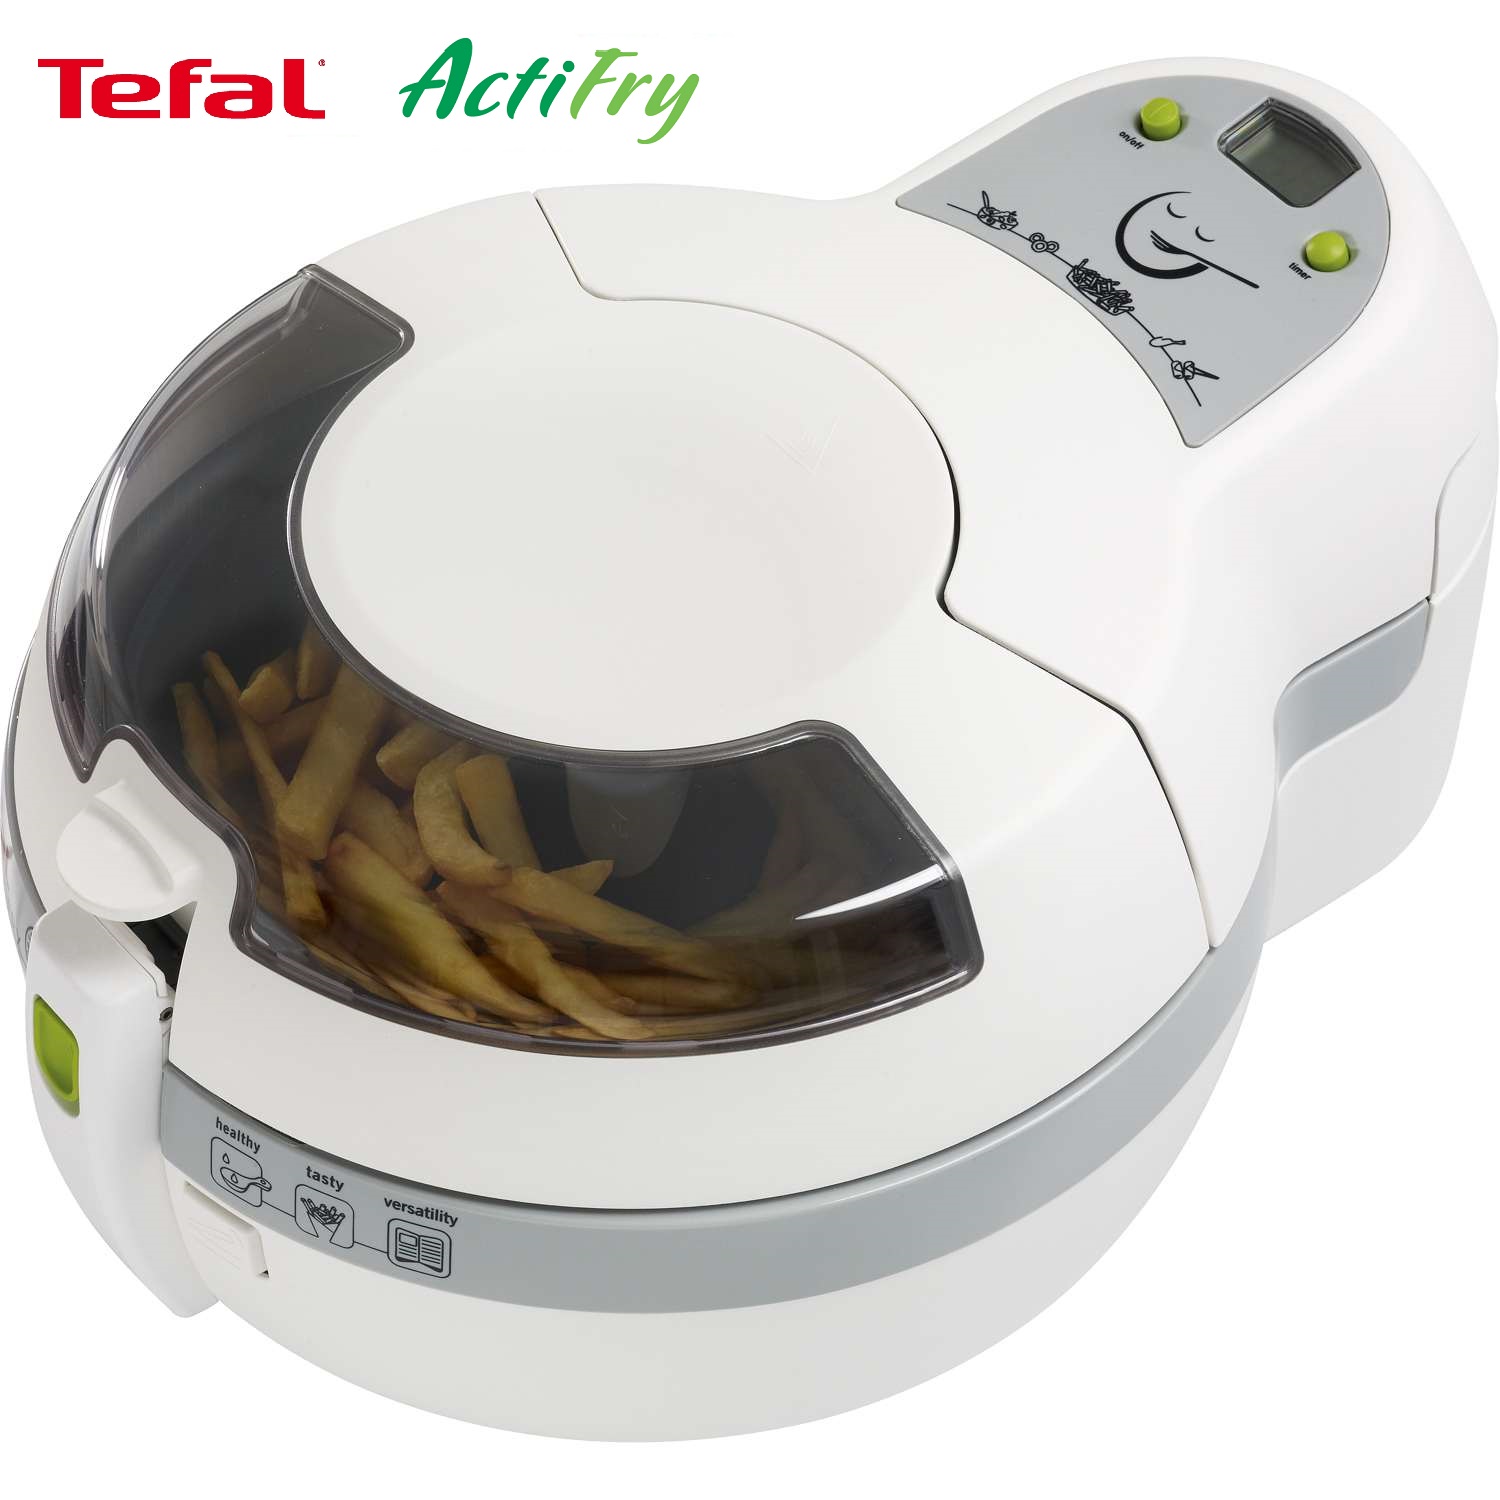 tefal actifry health cooker review